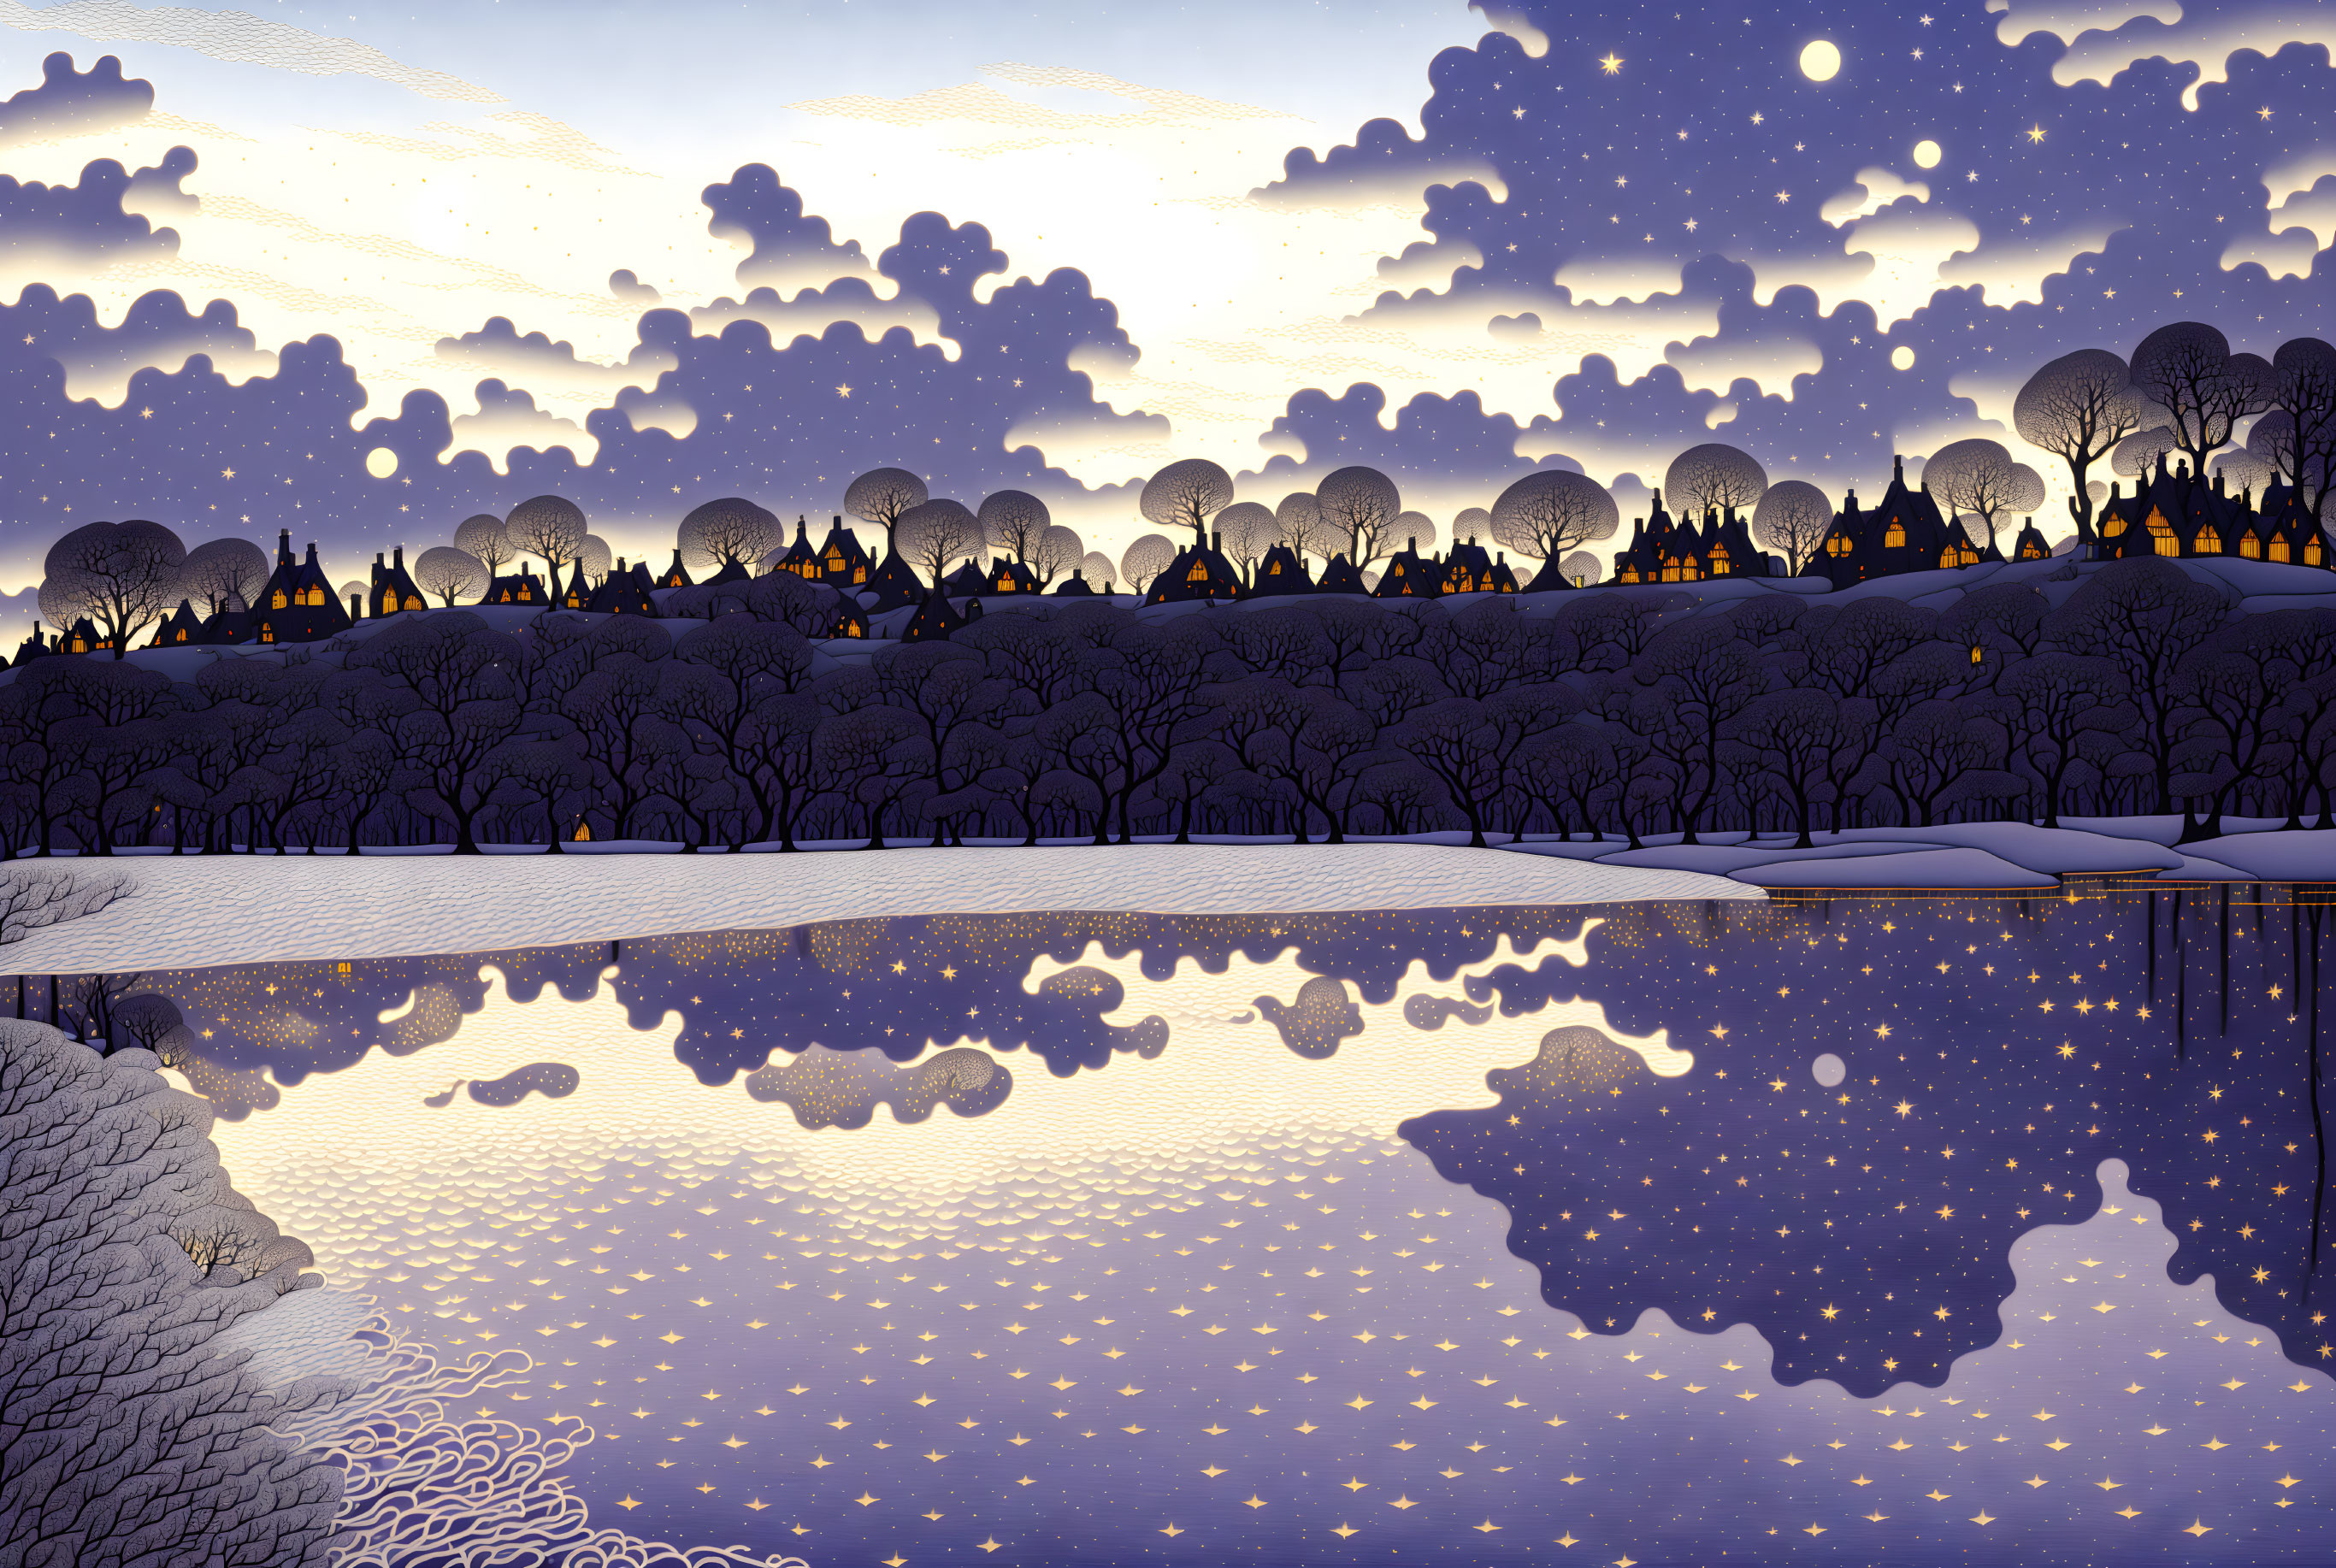 Illustrated nighttime landscape with bare trees, reflective lake, village, starry sky.